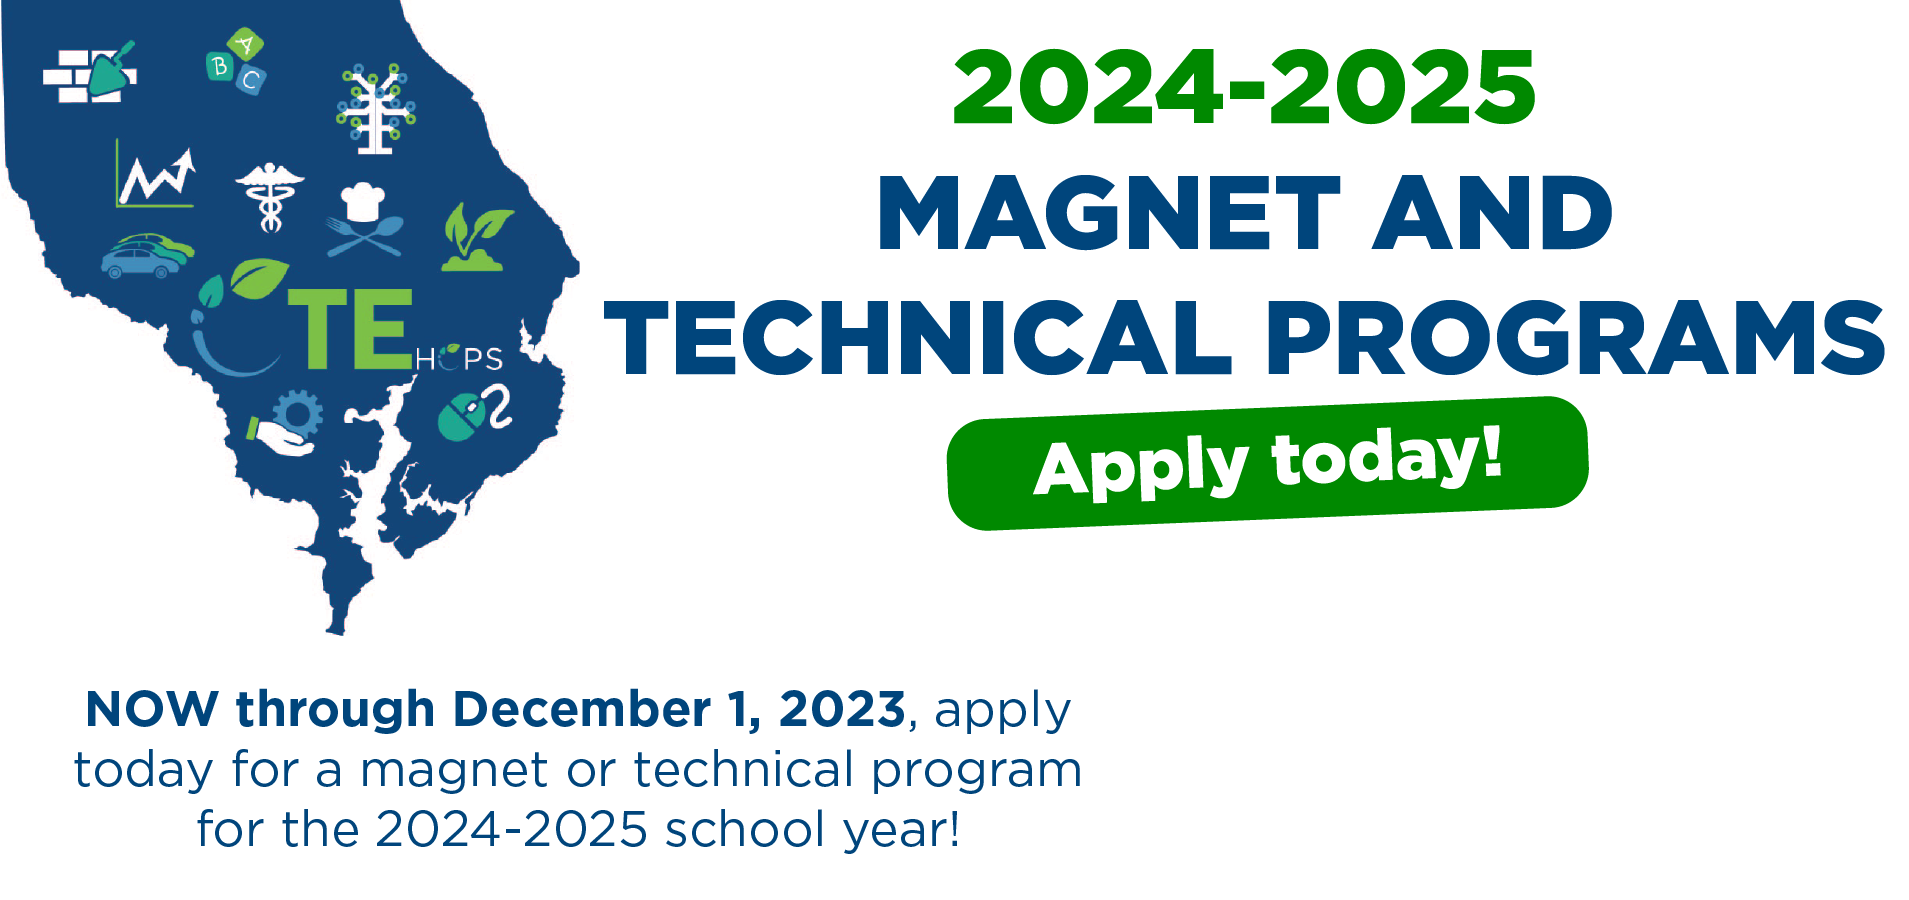 Apply today for a 2024-2025 magnet or technical program.